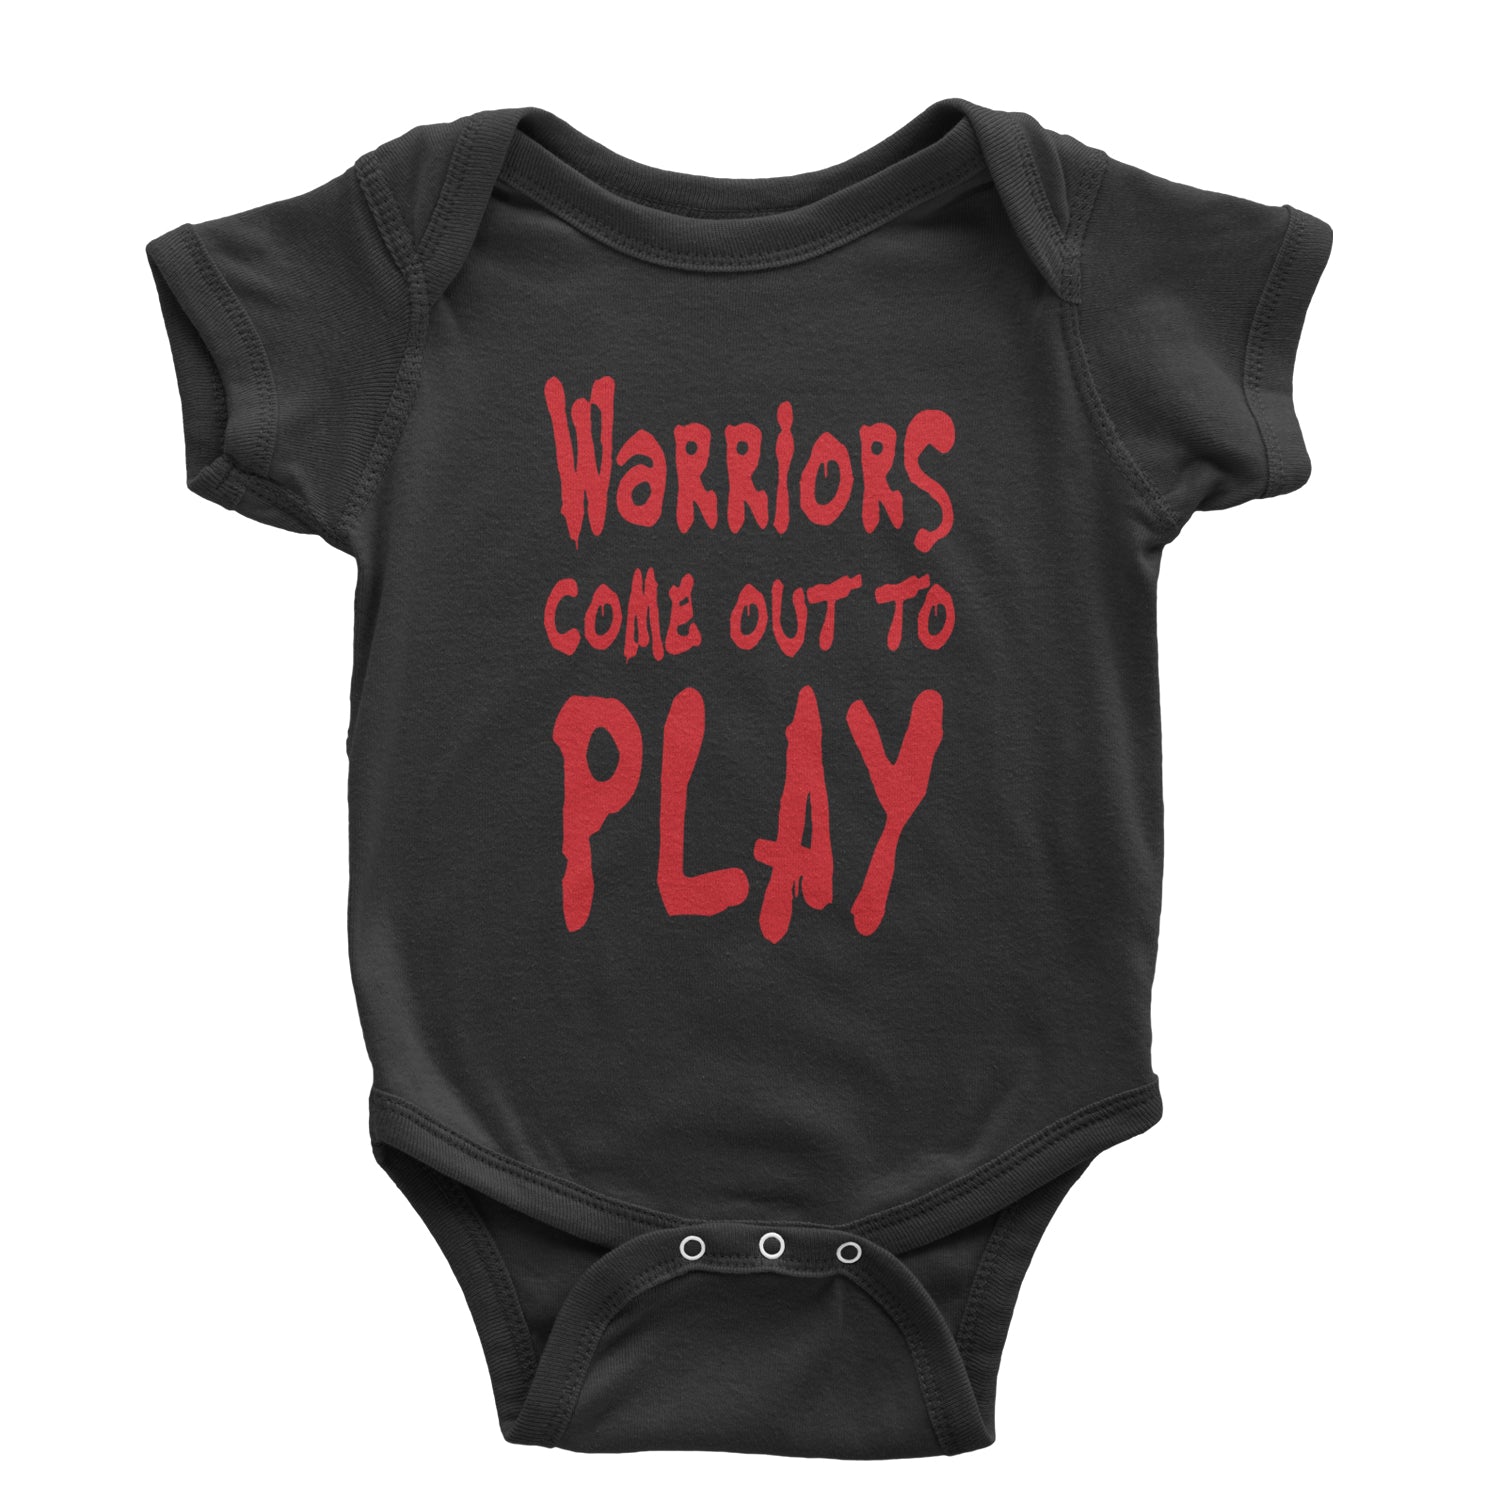 Warriors Come Out To Play  Infant One-Piece Romper Bodysuit and Toddler T-shirt